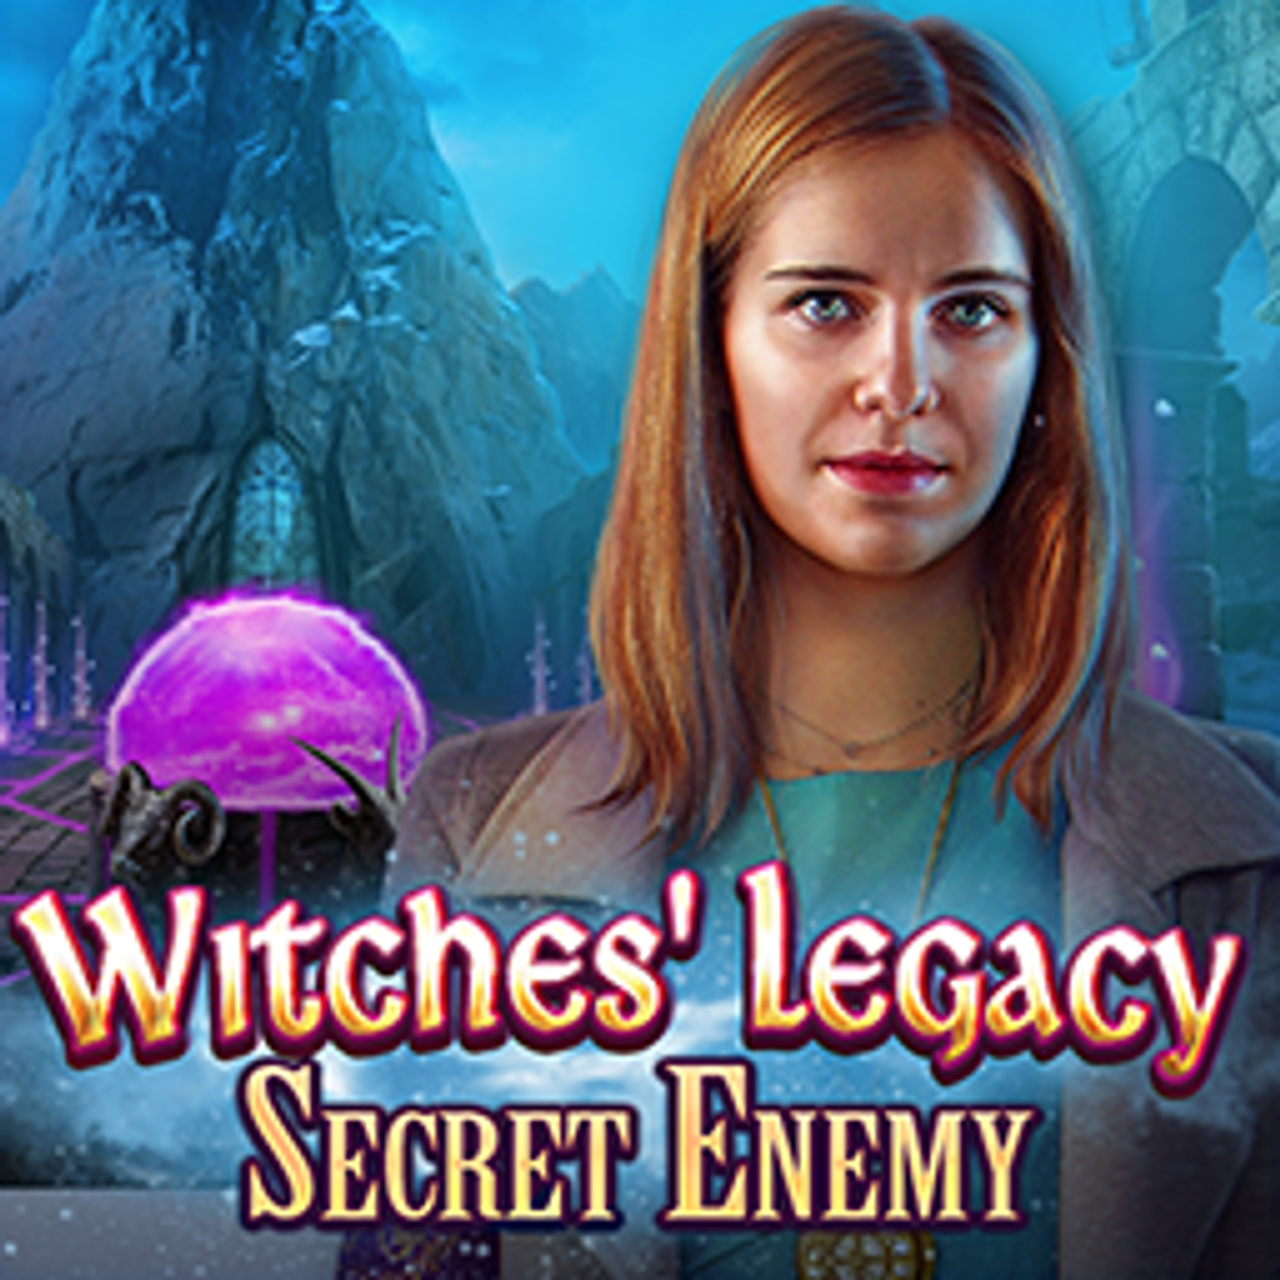 Witches' Legacy: Secret Enemy